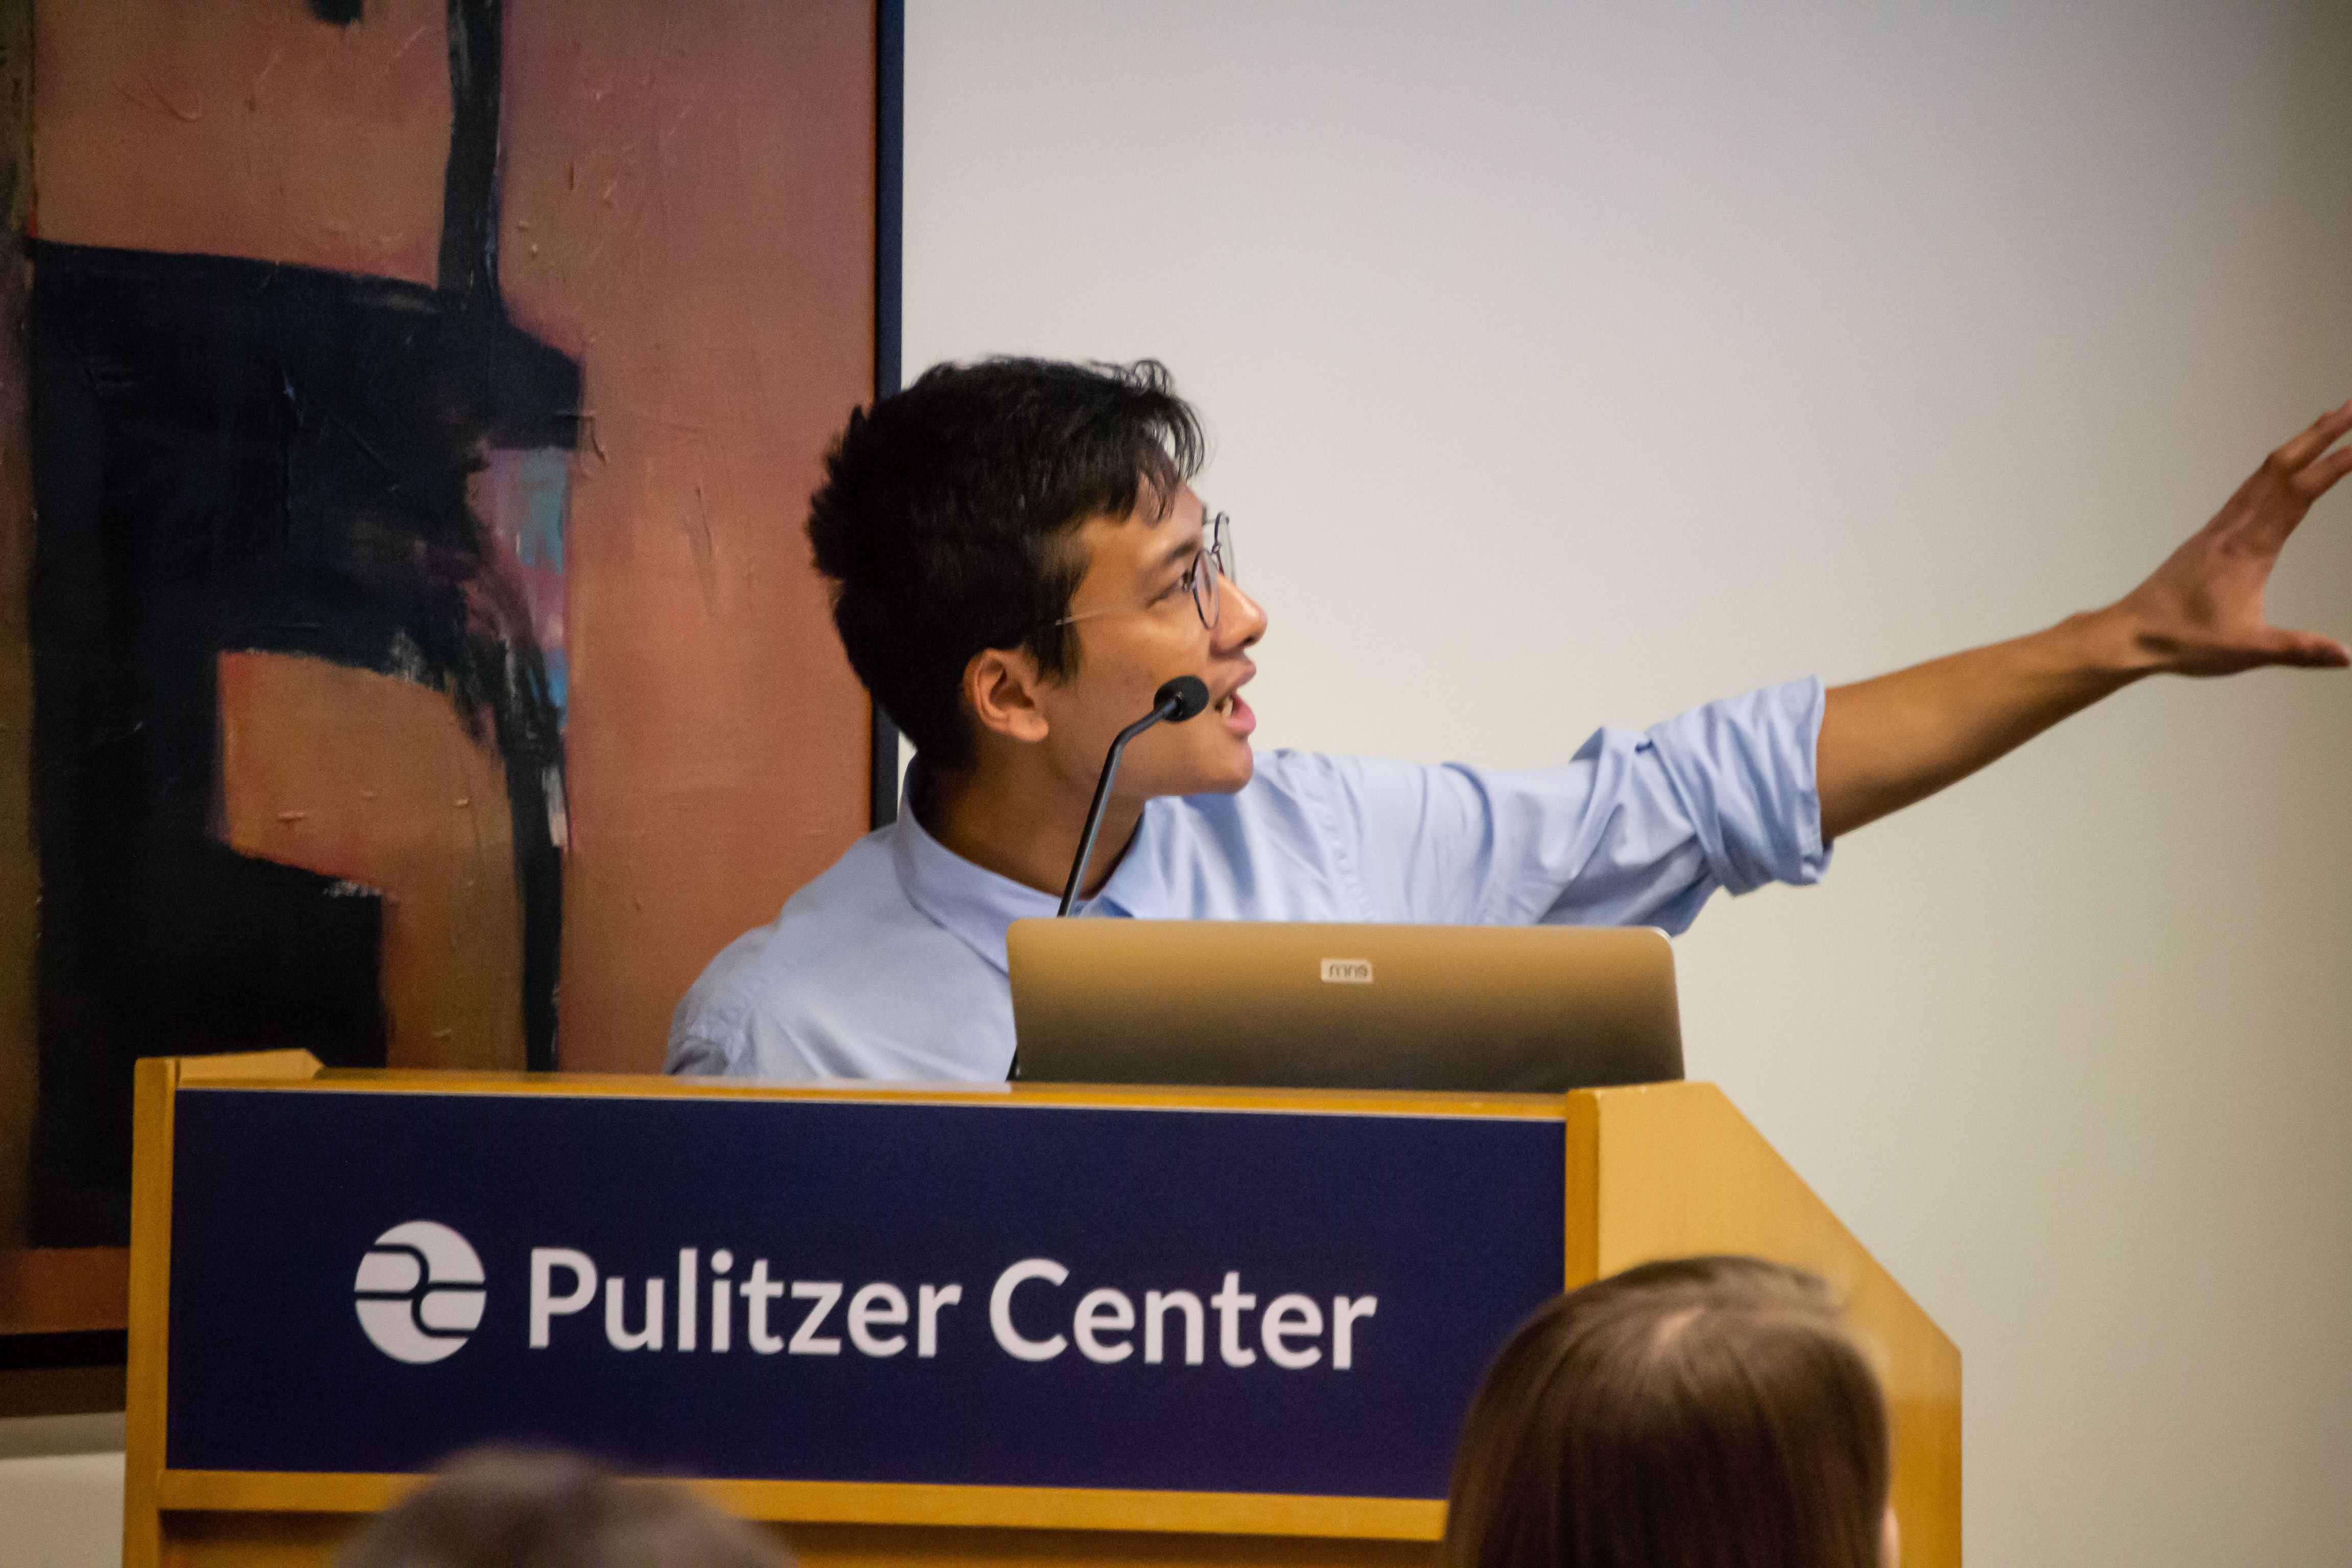 Ursus Gurung (City Colleges of Chicago) gestures to the screen during his presentation of "Nepali-Americans in the U.S." on Day One of Washington Weekend. Gurung presented for the "Cultural Identity" panel. Image by Nora Moraga-Lewy. United States, 2019.